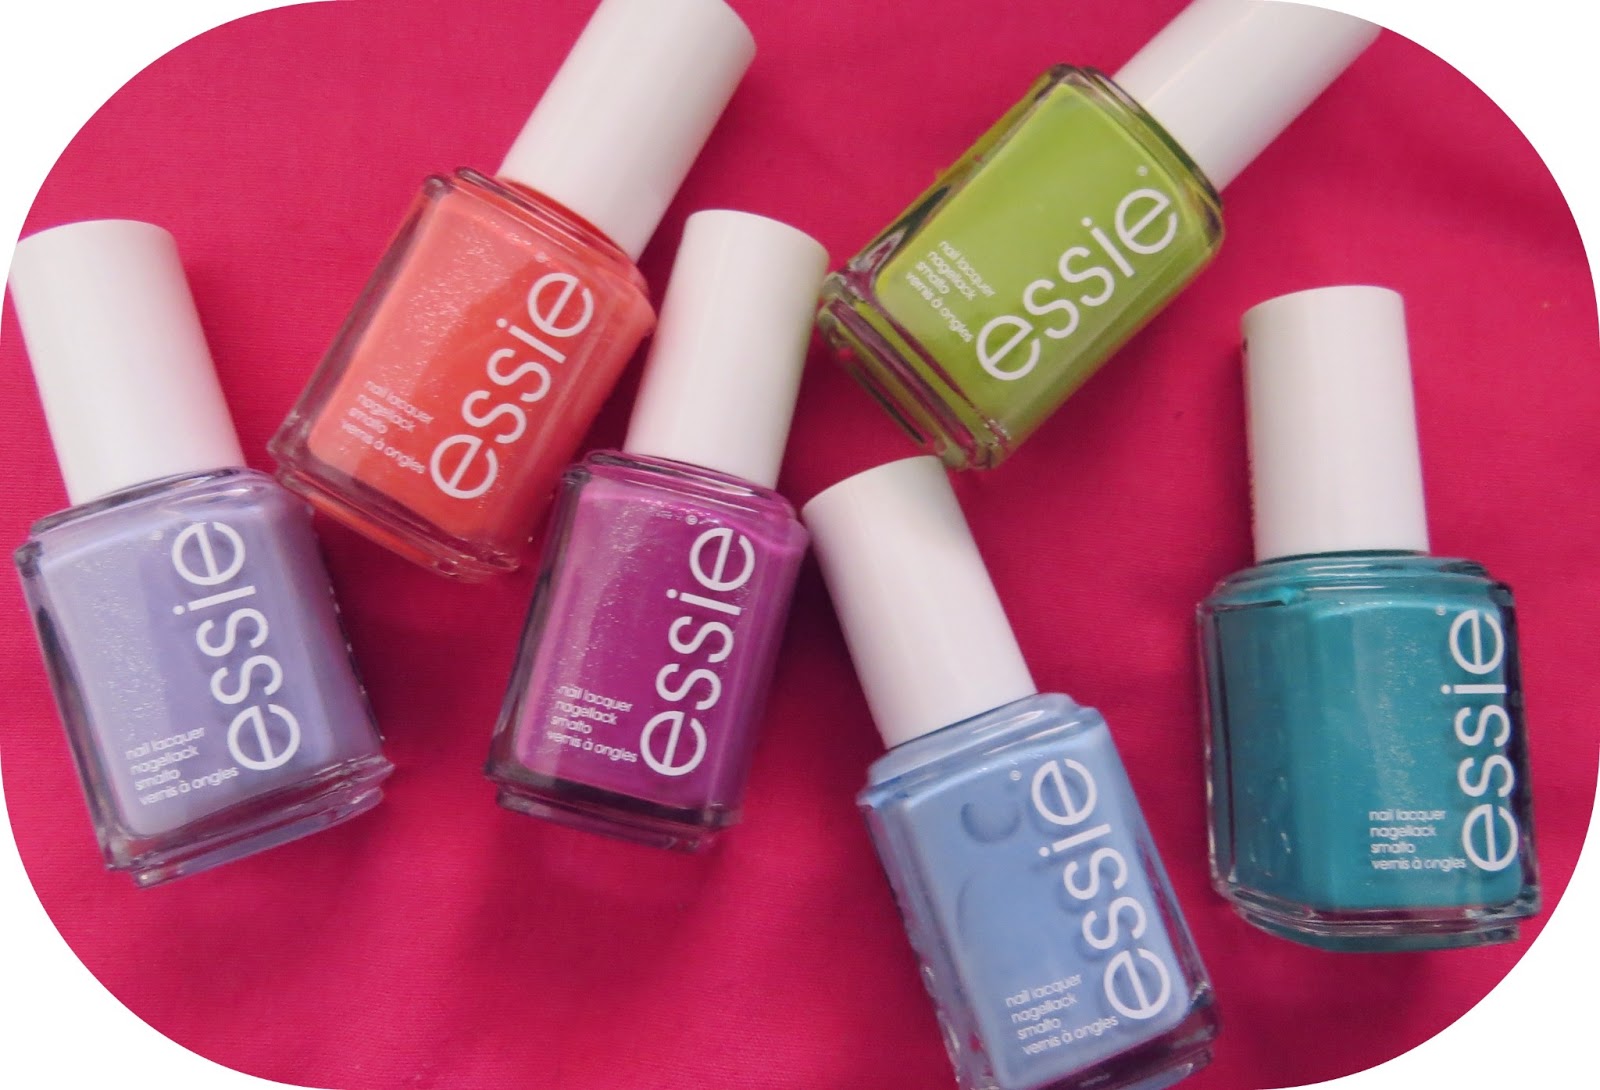 2. Essie Nail Polish in "In the Lobby" - wide 3